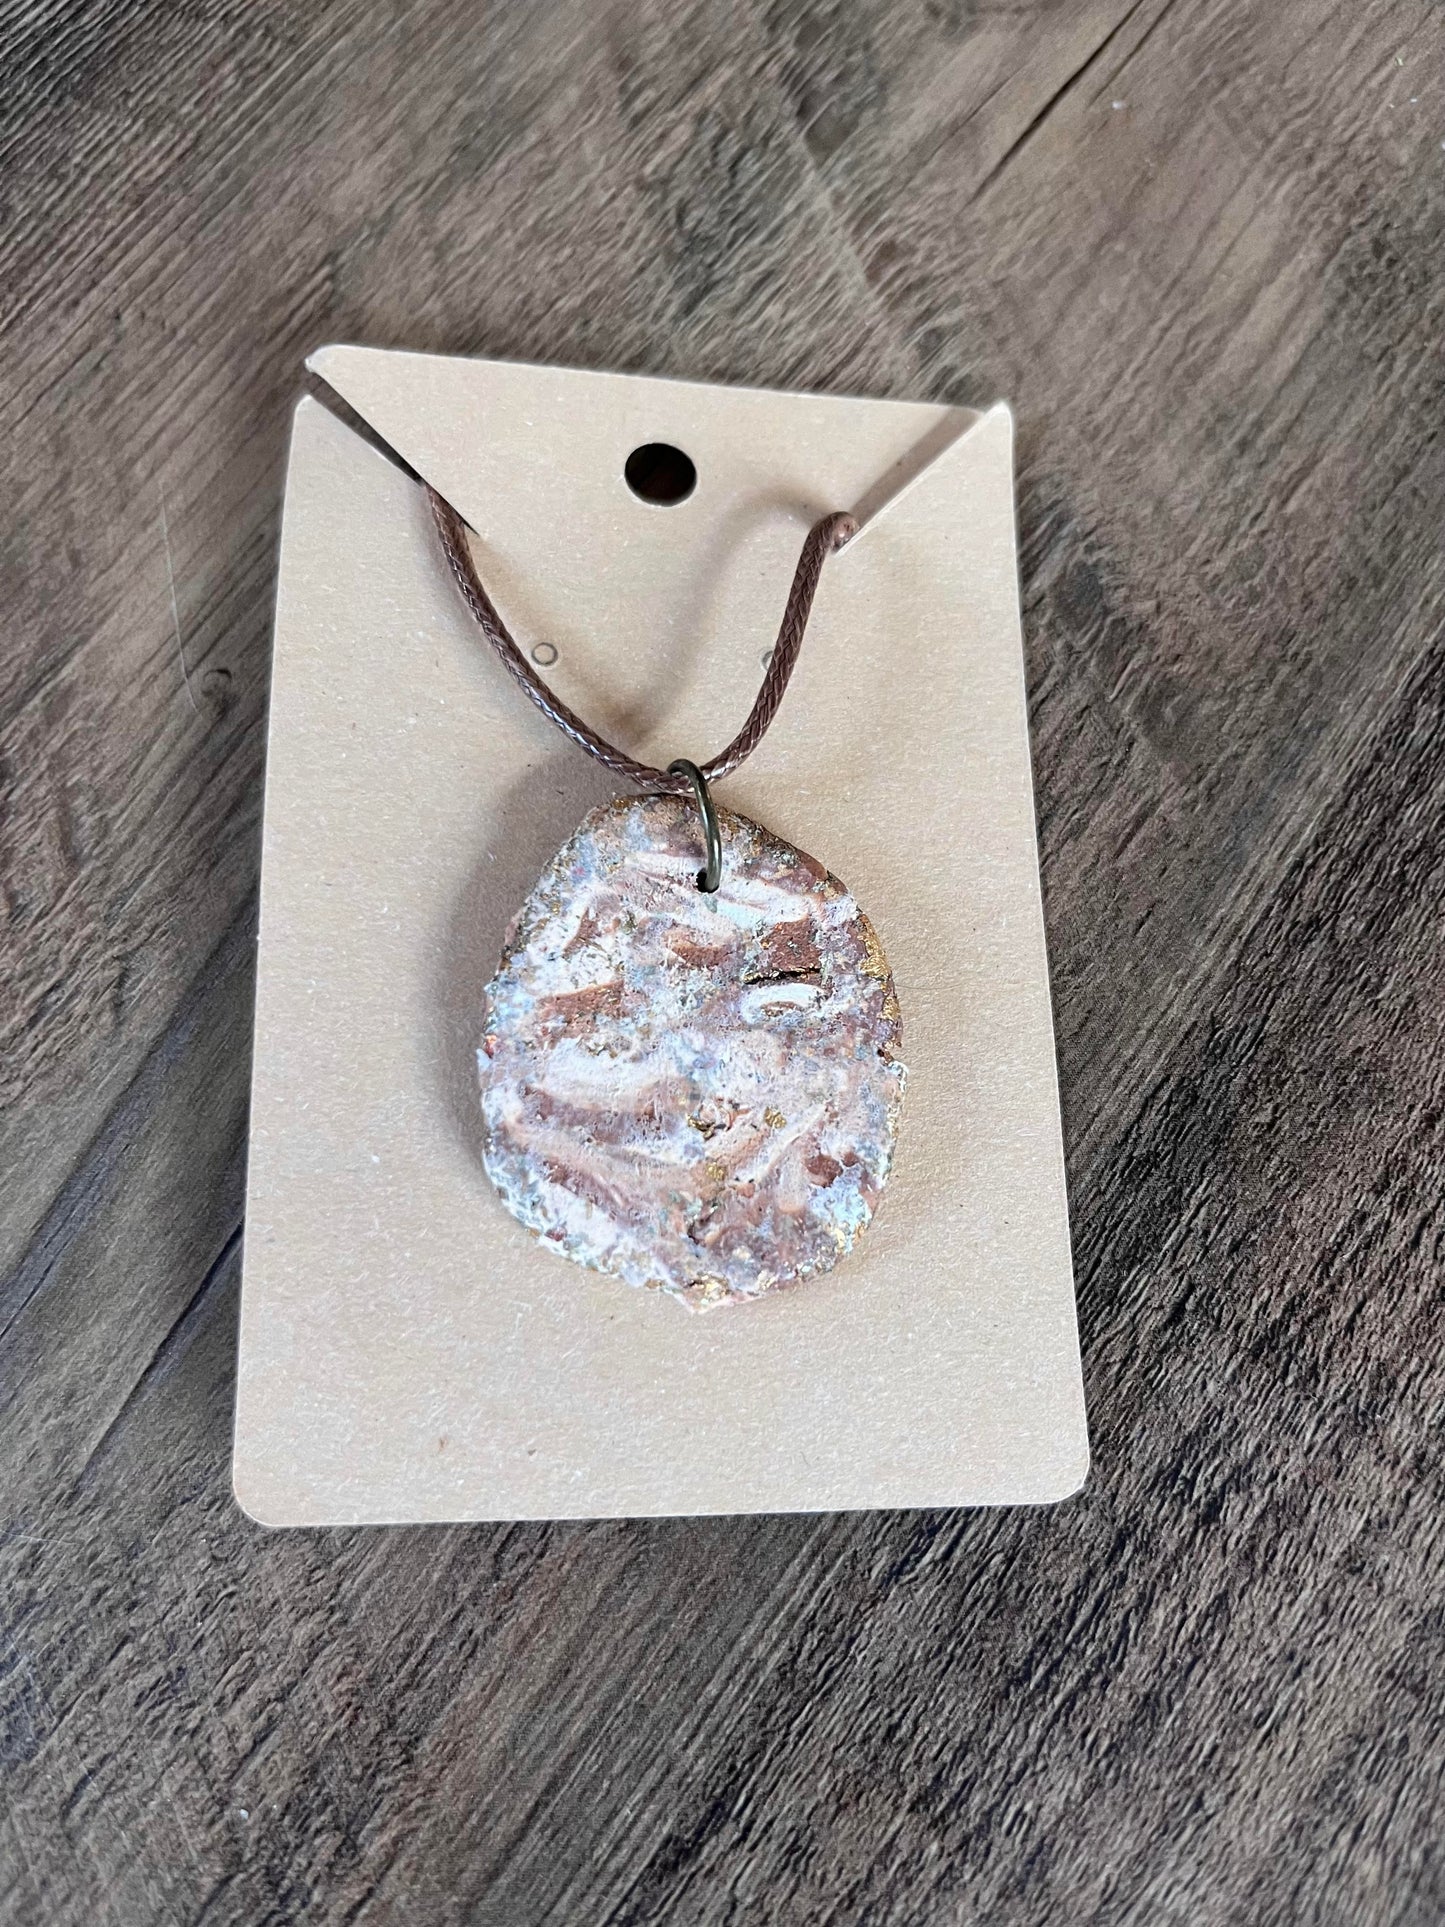 Clay Necklace -Shimmery Bark